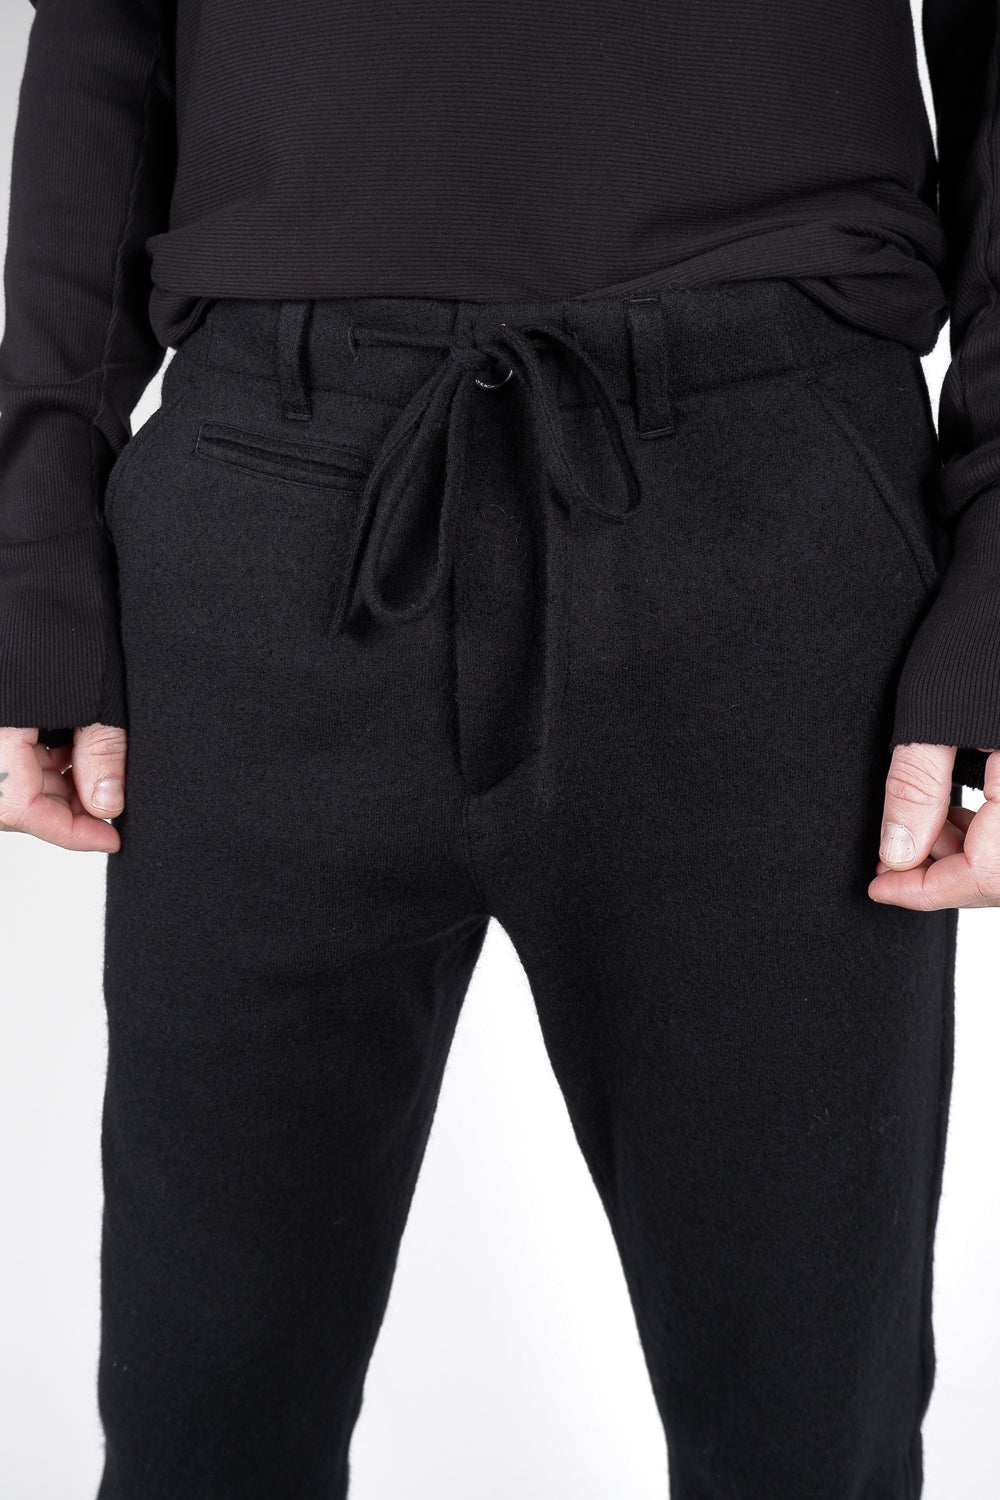 Buy the Hannes Roether Boiled Wool Trousers in Black at Intro. Spend £50 for free UK delivery. Official stockists. We ship worldwide.